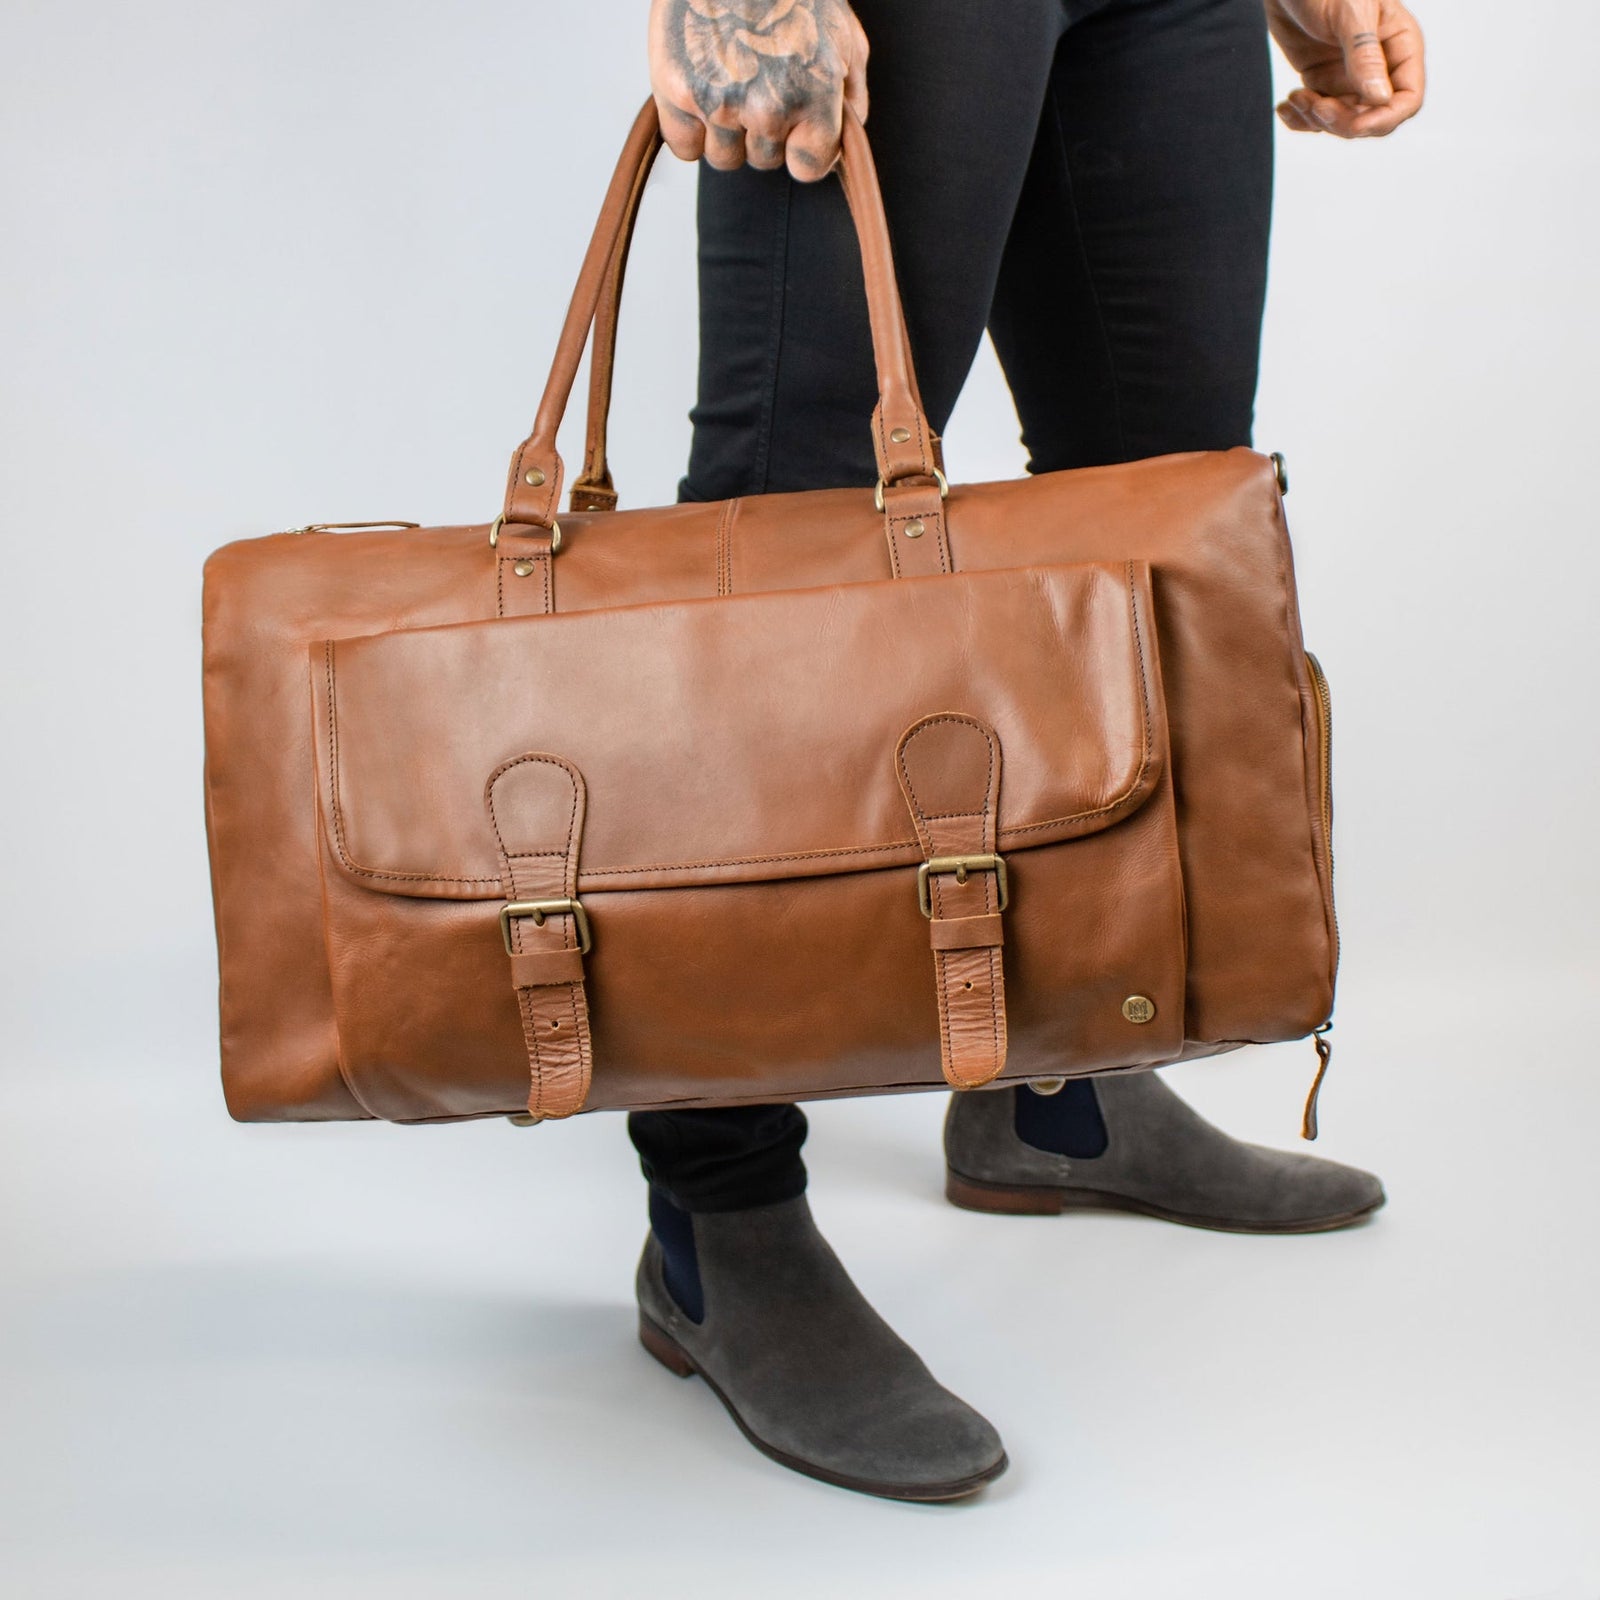 Men's Nappa Leather Duffle Bag in Black by Quince